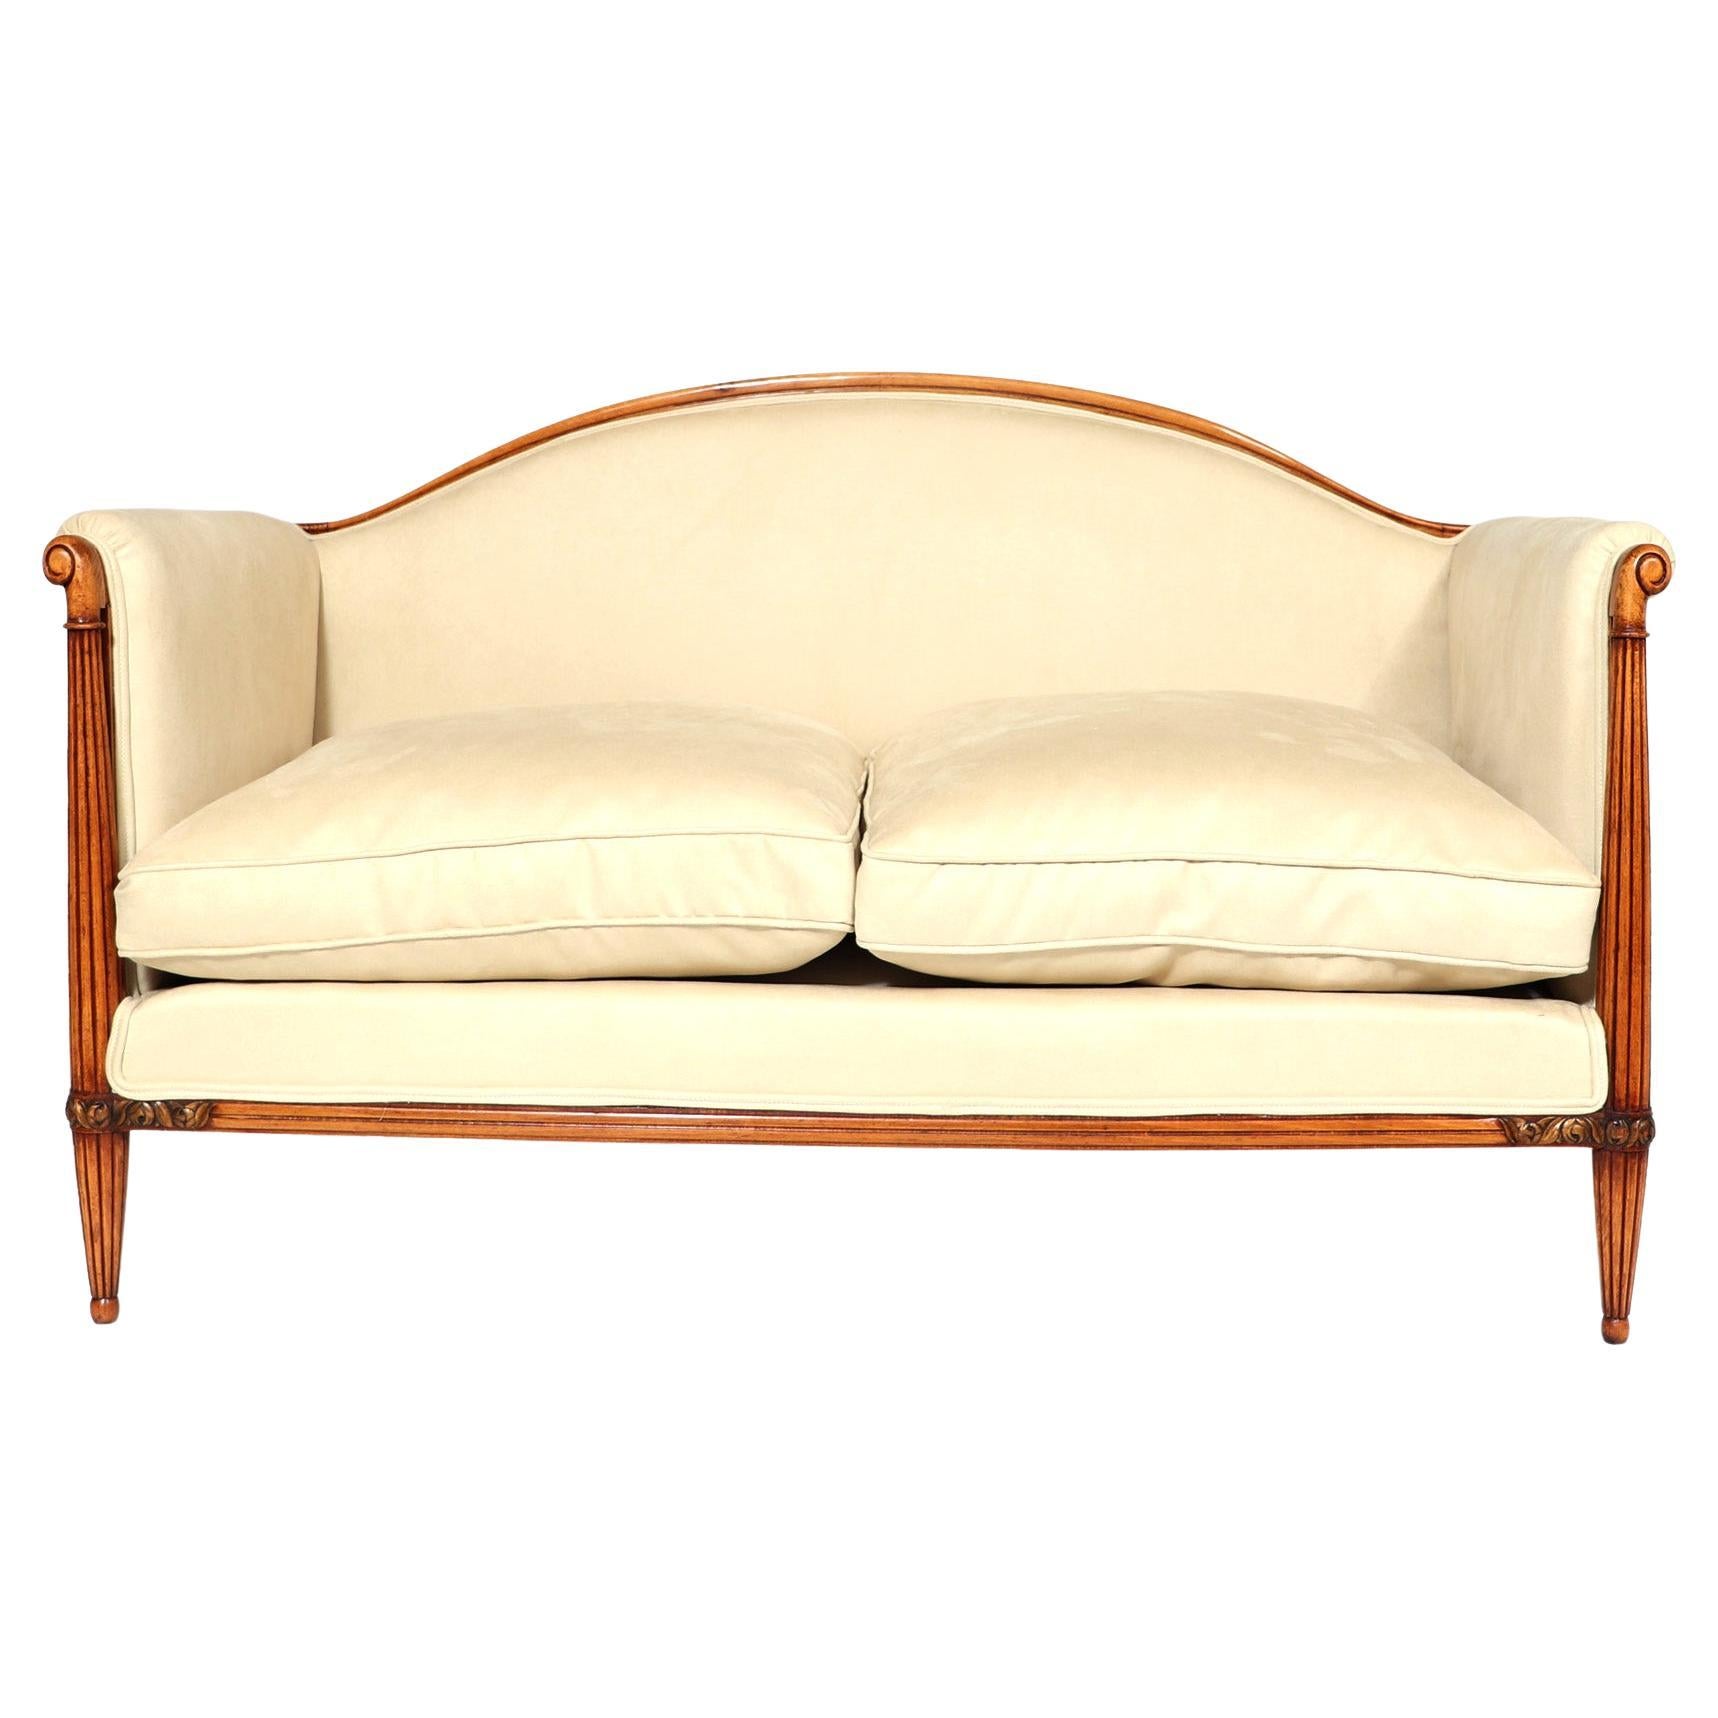 French Art Deco Sofa in the Manner of Maurice Dufrene